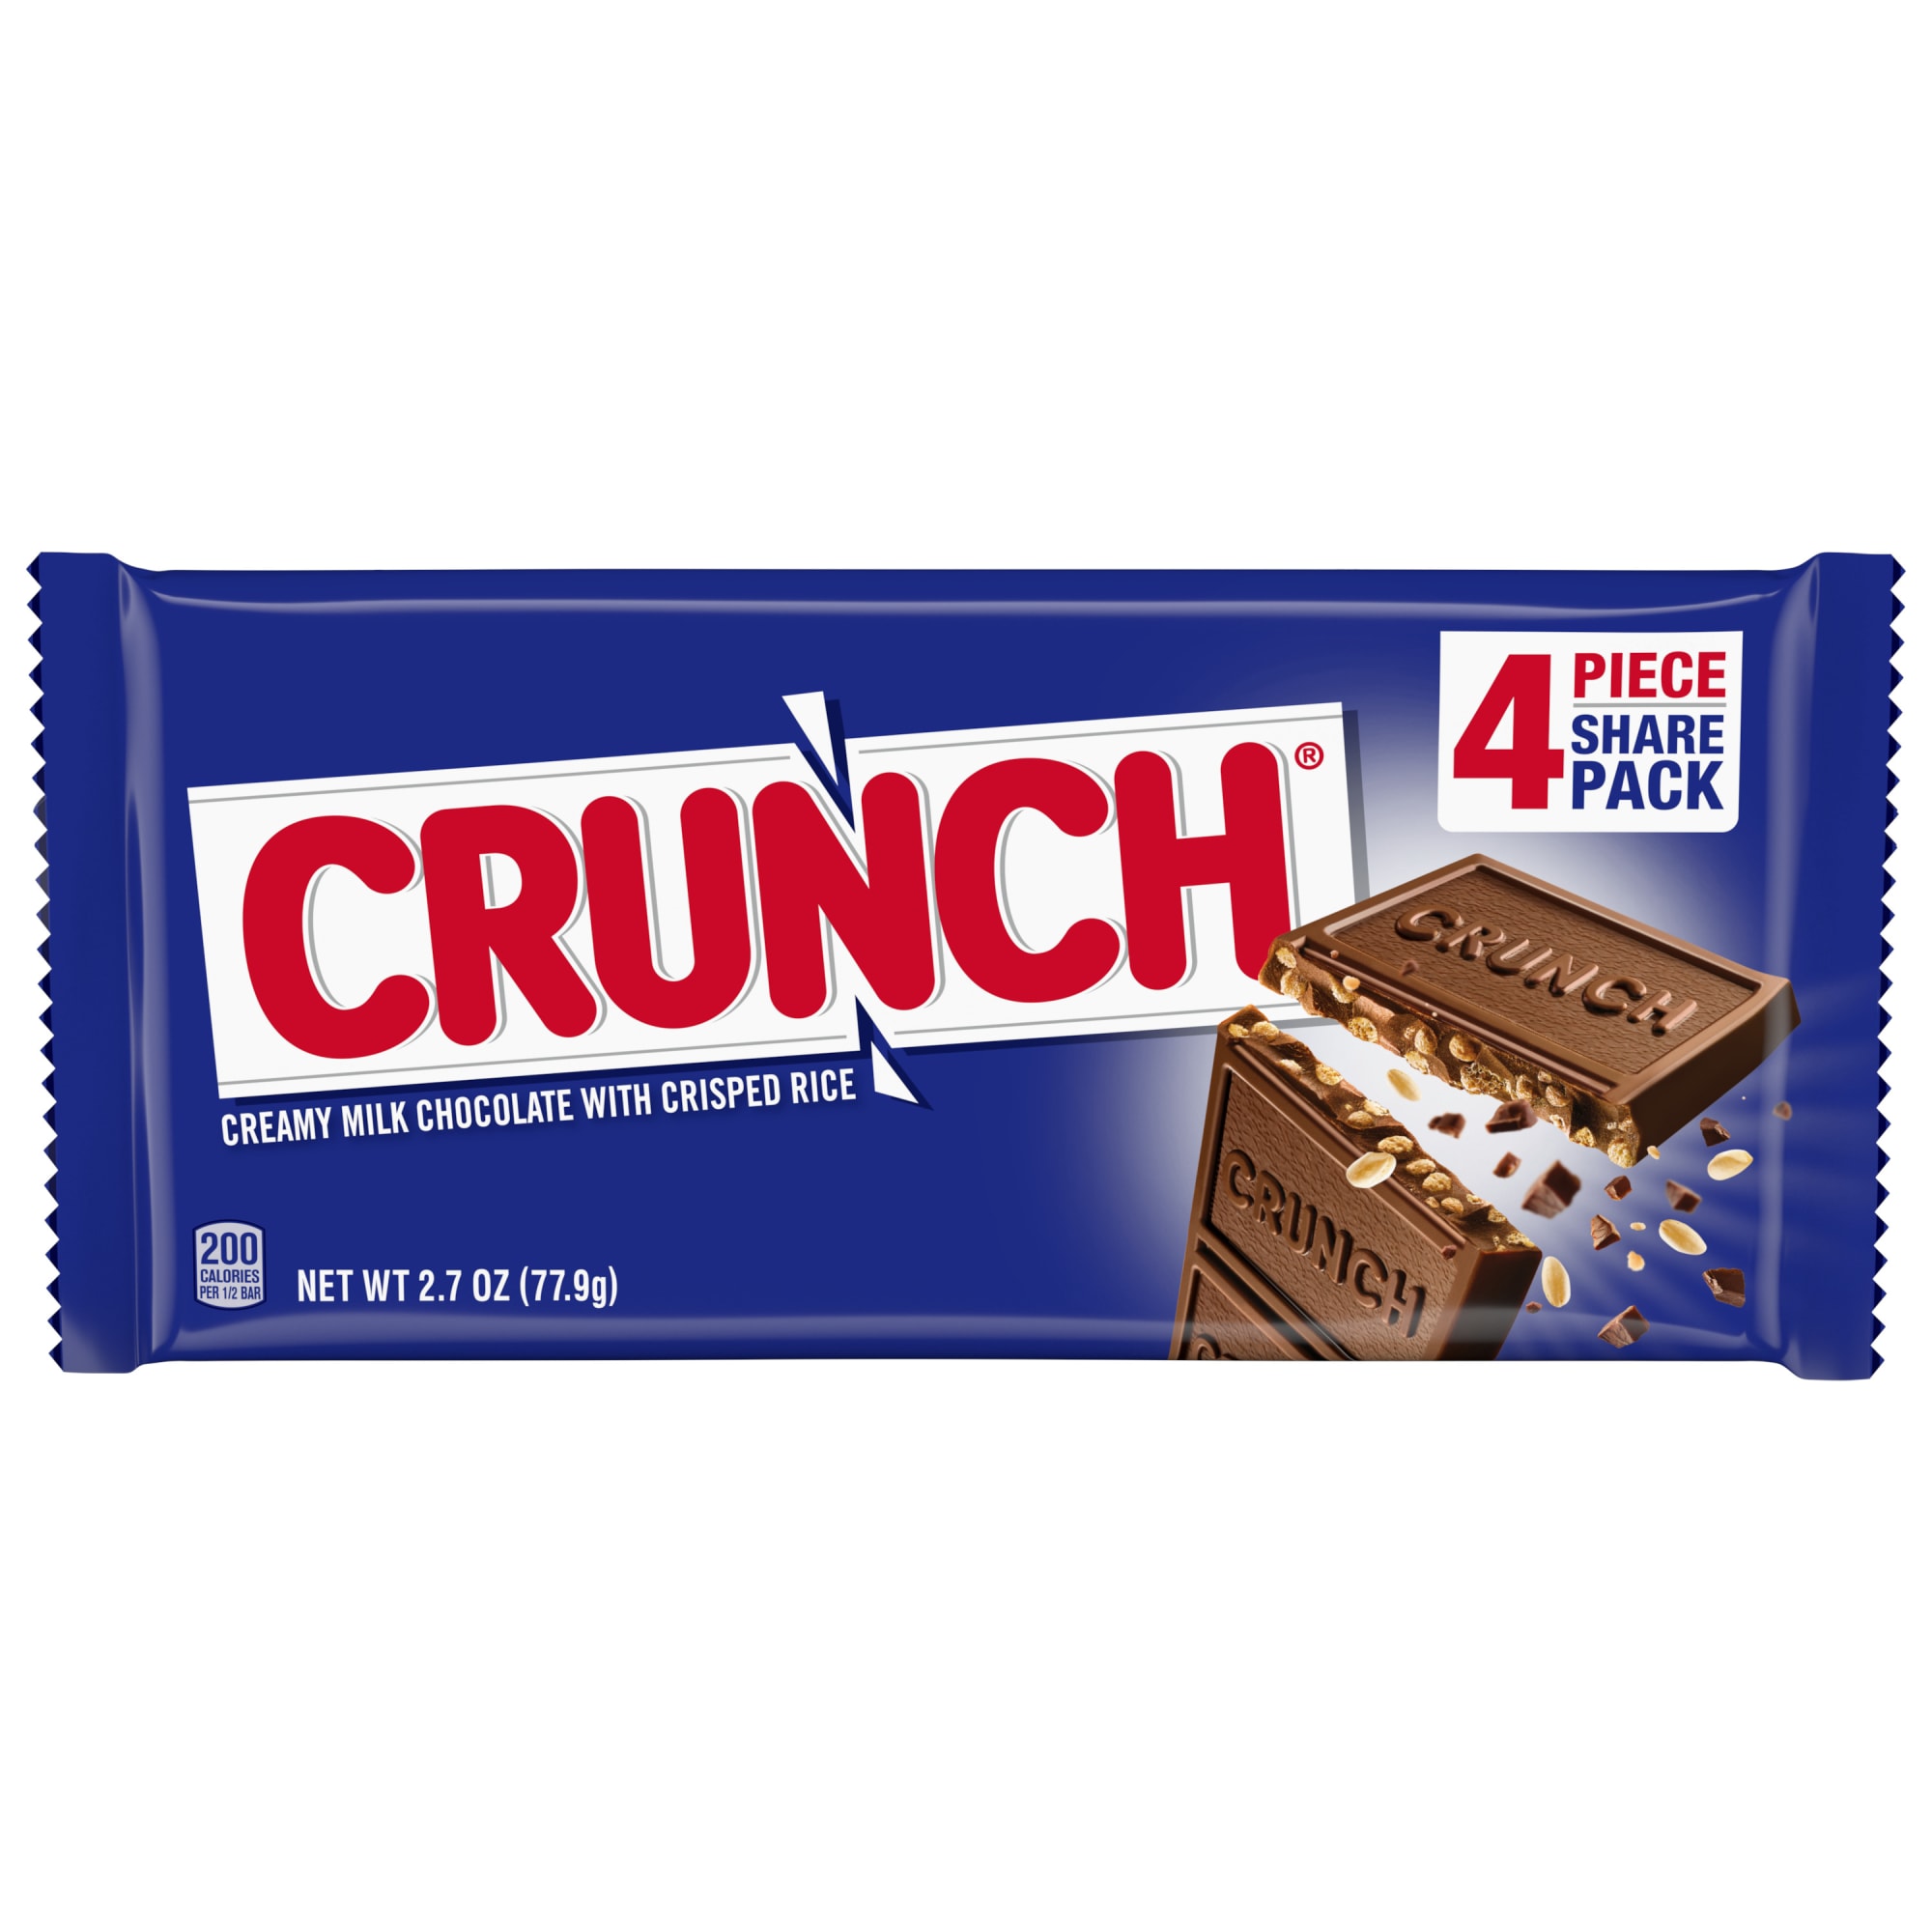 CRUNCH Milk Chocolate and Crisped Rice, Share Size Candy Bars, Share Pack, 2.7 oz - image 1 of 9